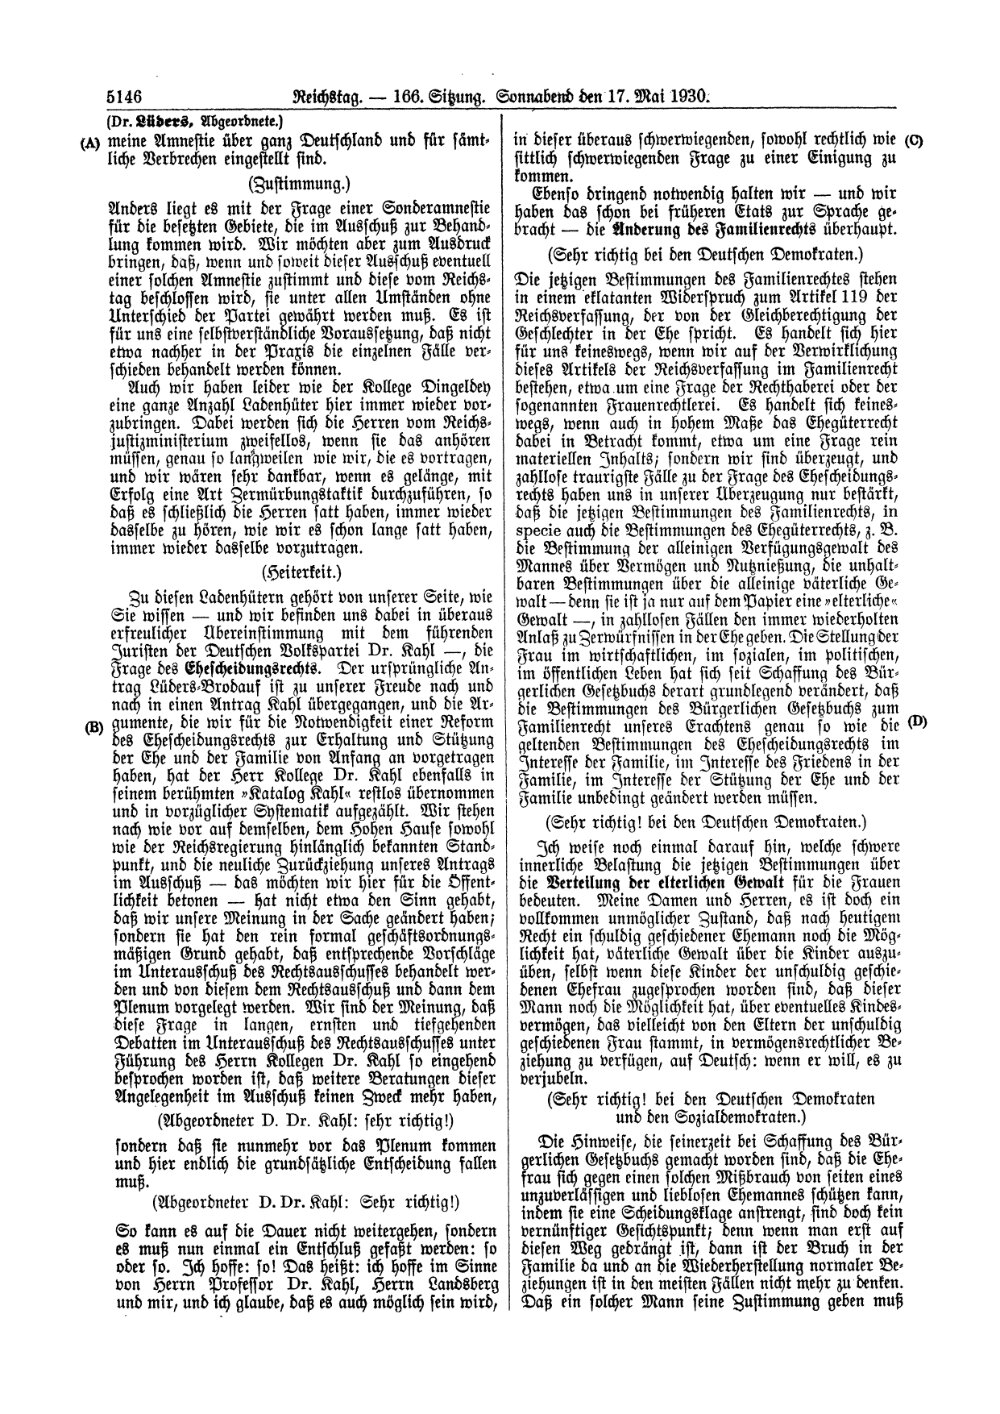 Scan of page 5146